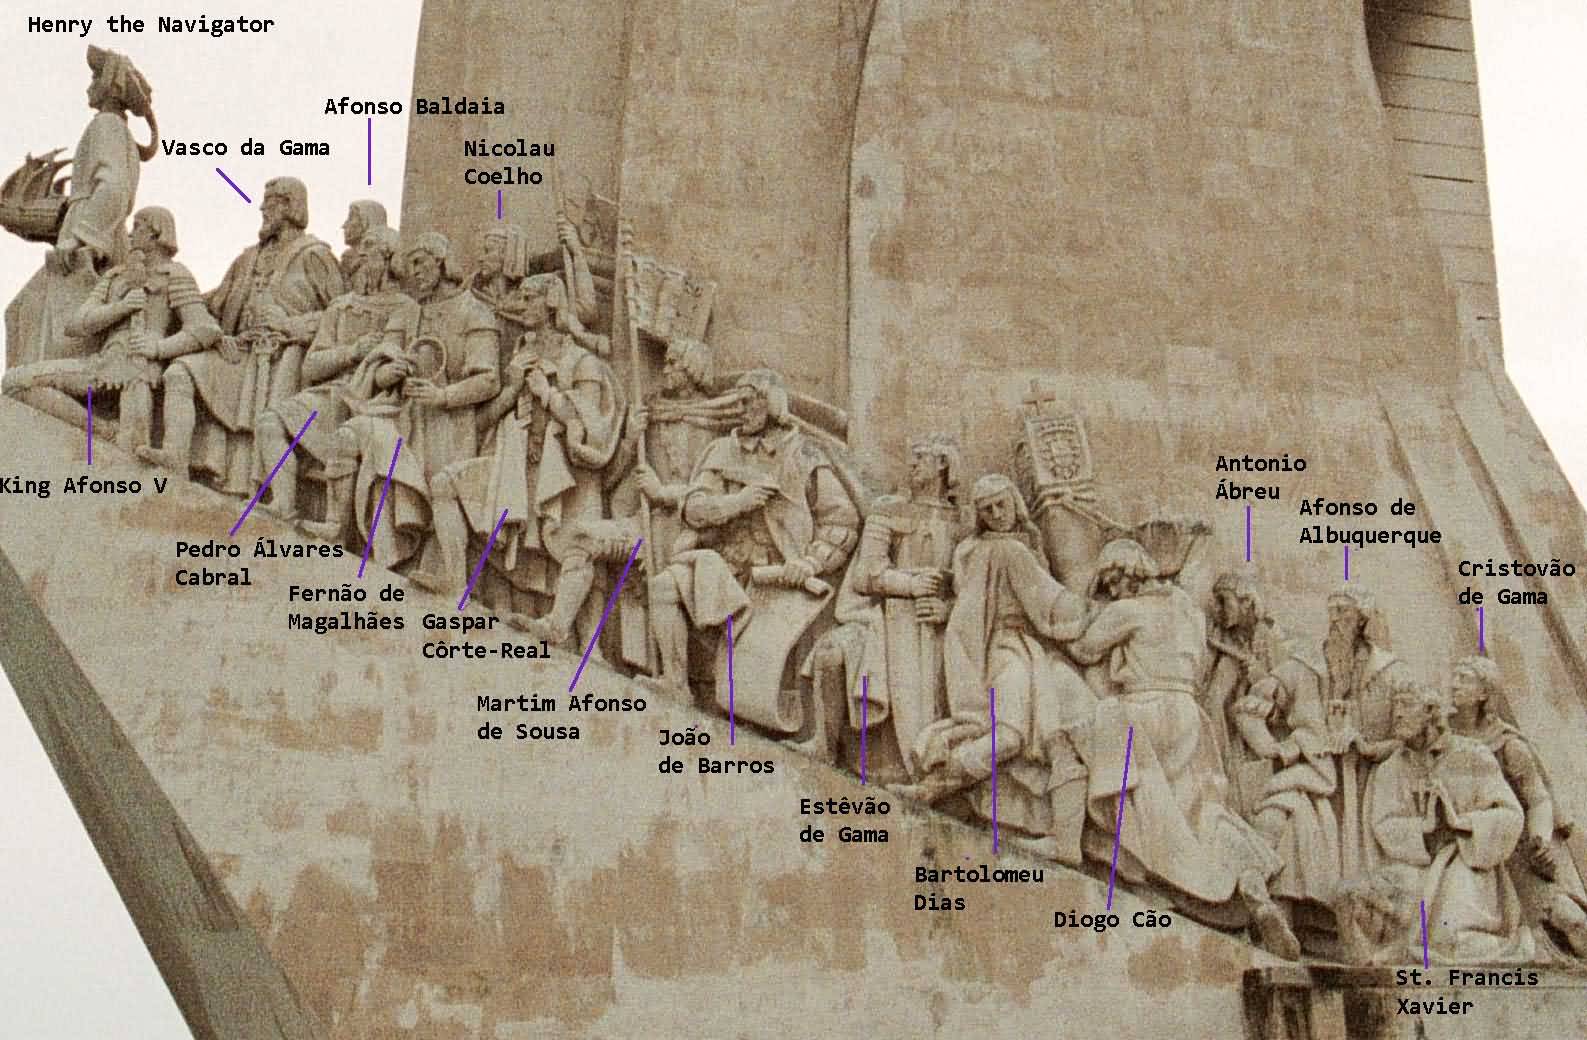 Eastern Profile Of Padrao dos Descobrimentos With Figures Labeled